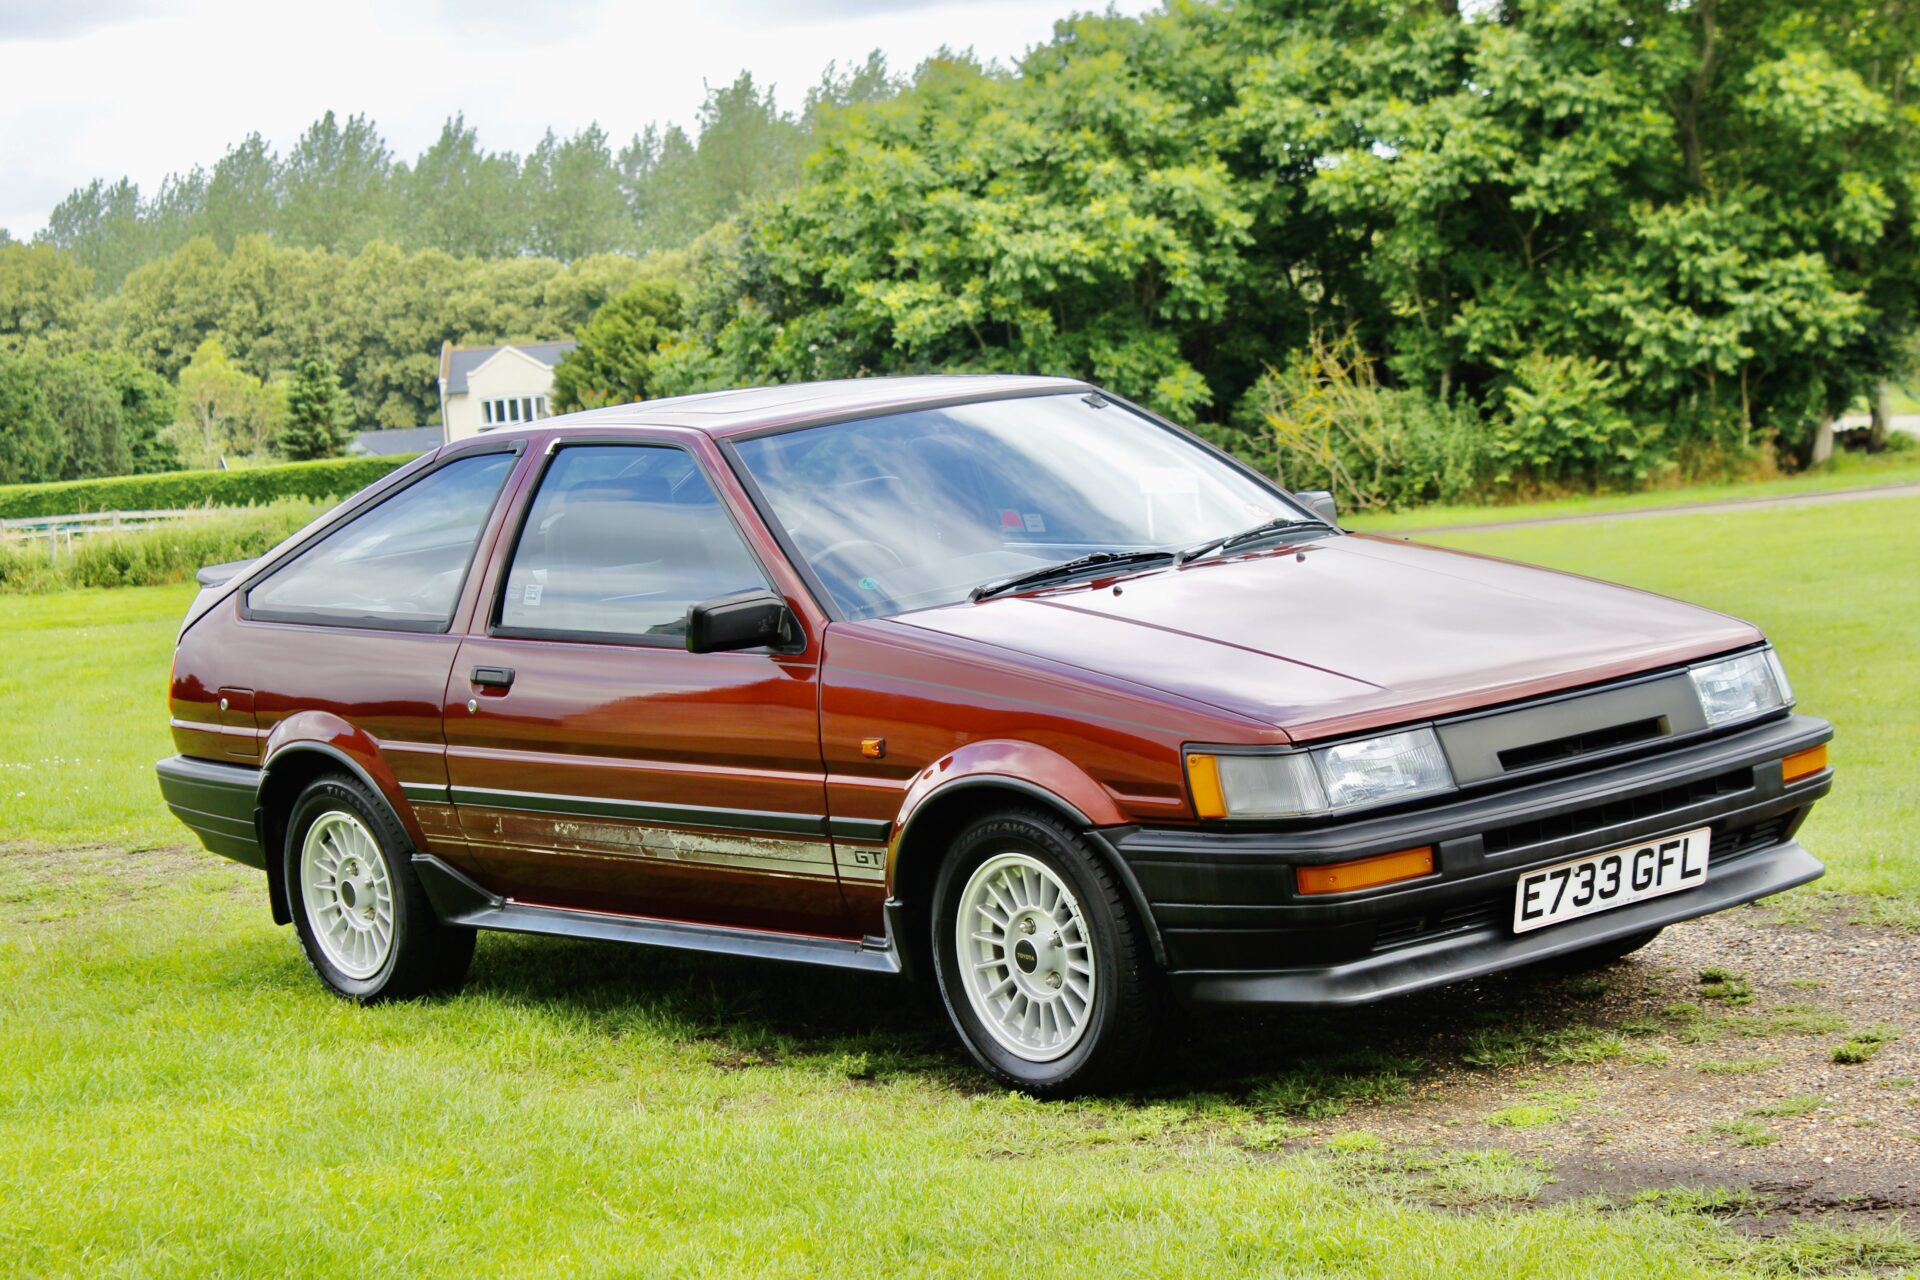 This AE86 Toyota Corolla Just Sold For a RecordBreaking 64,000